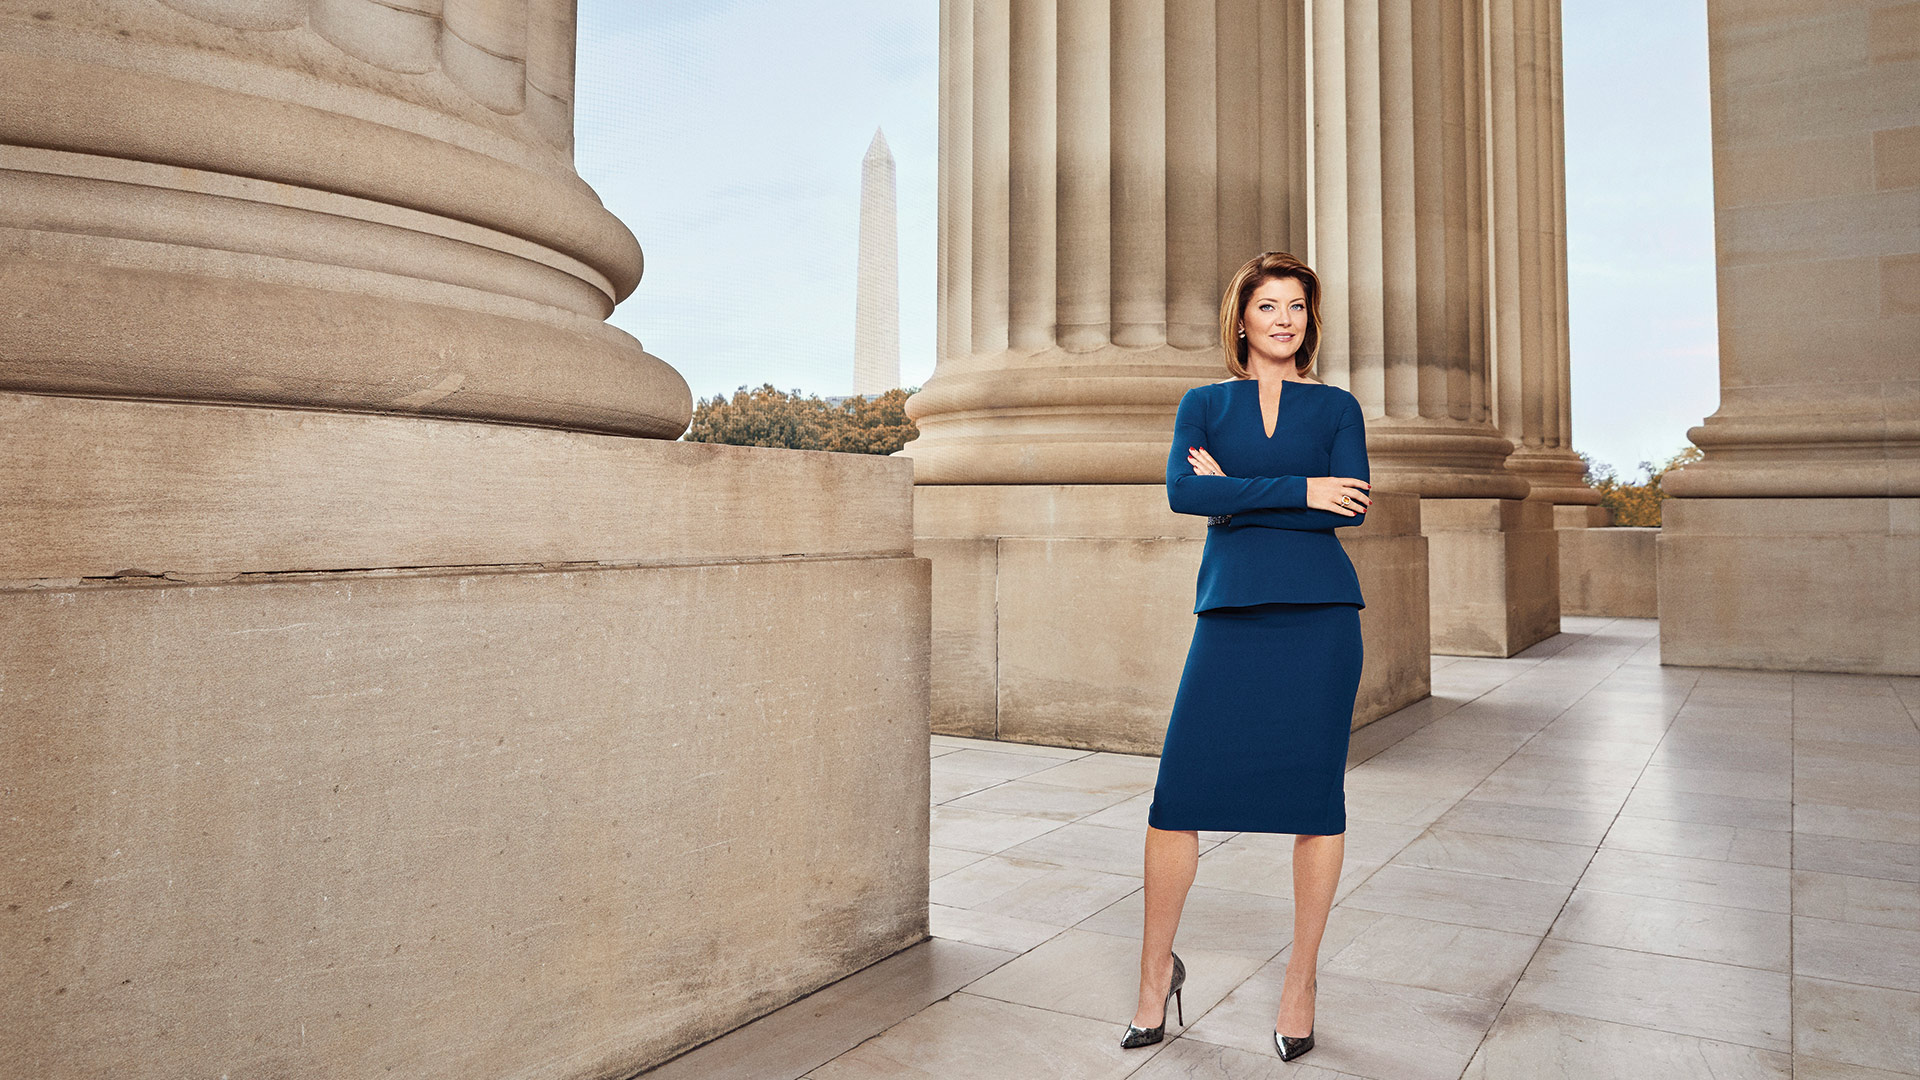 Norah O'Donnell shines in this monumental cover photo shoot.